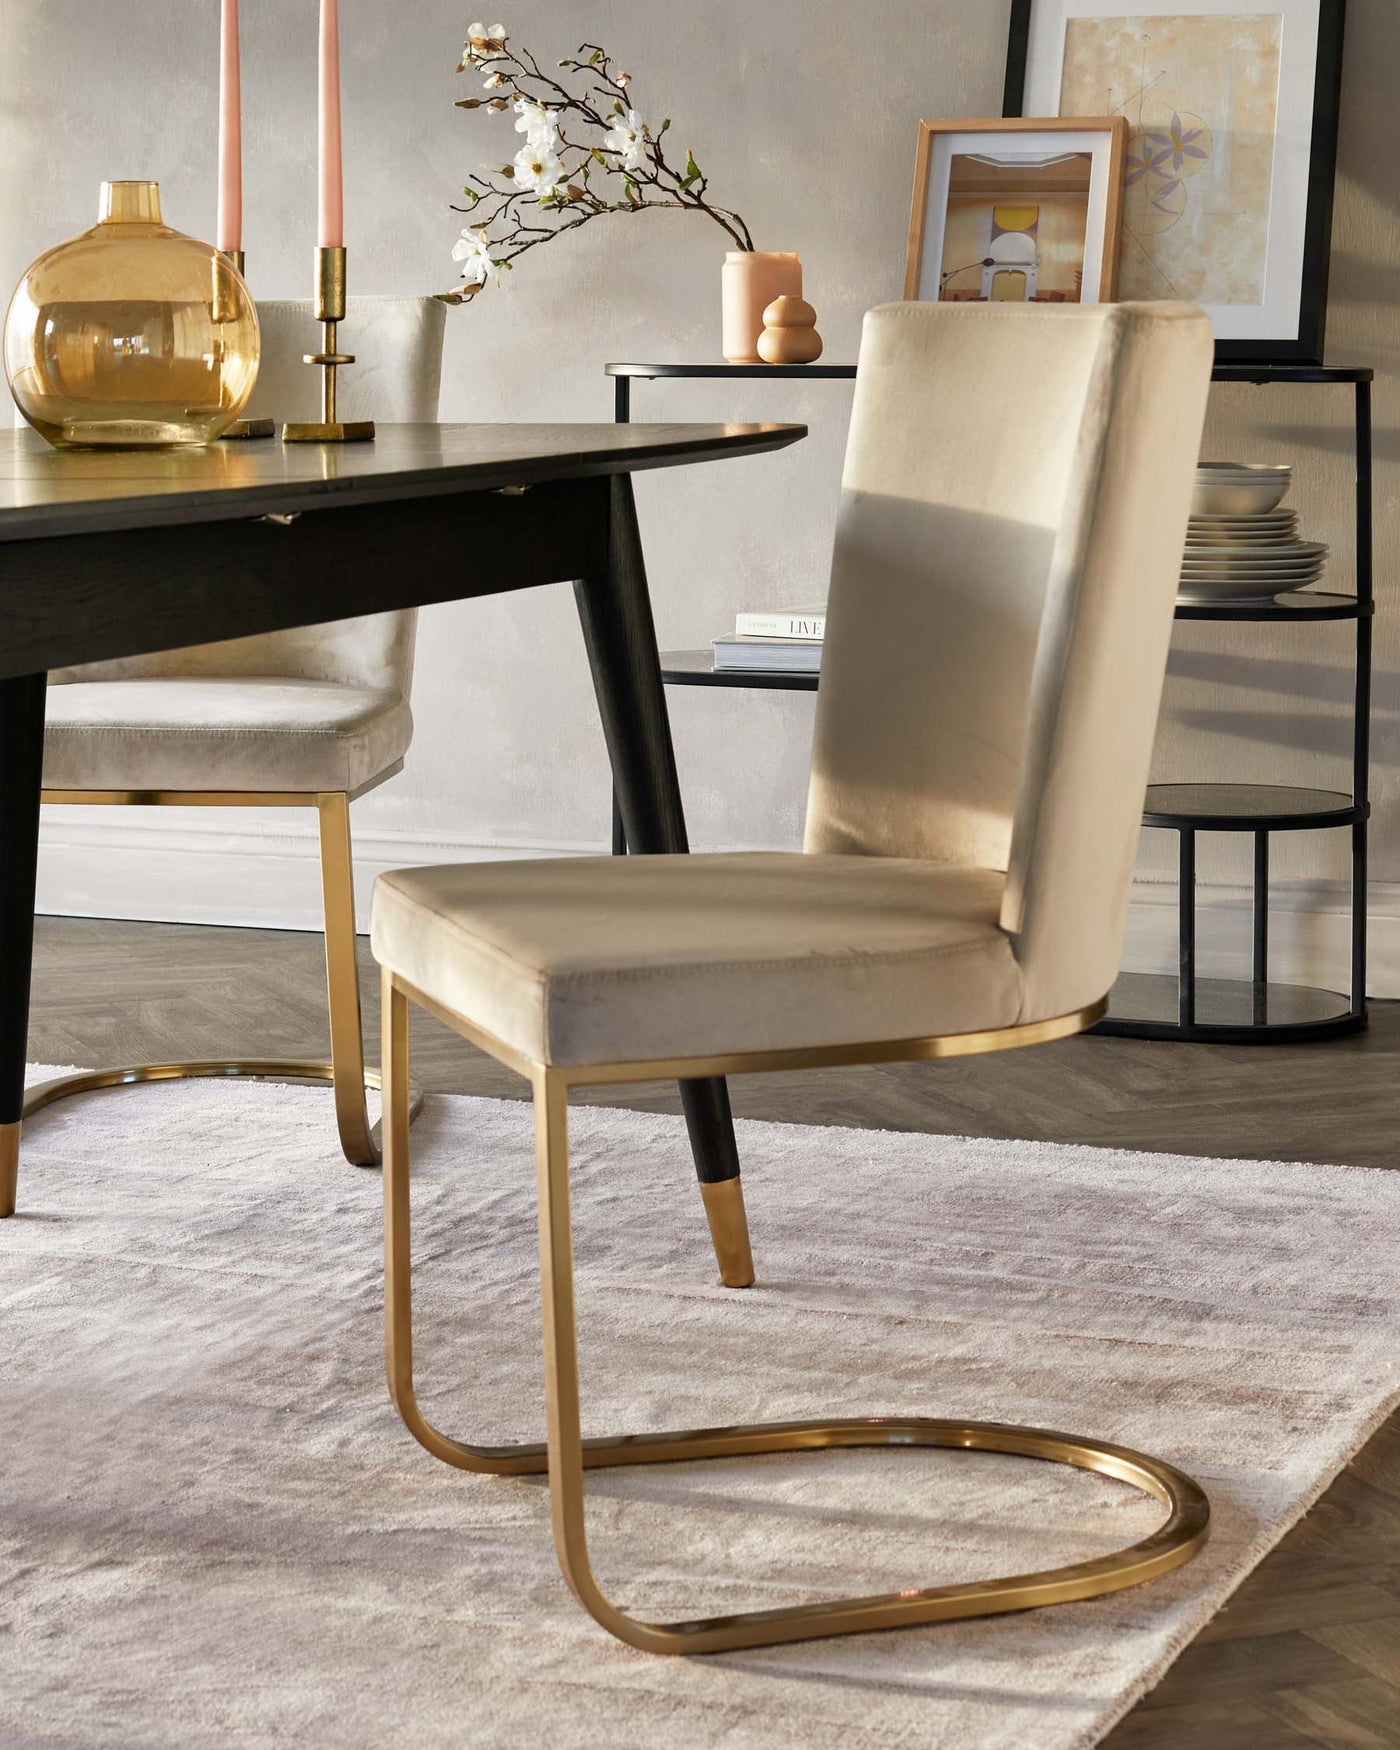 Elegant contemporary dining room featuring a sleek black oval-shaped dining table with a matte finish, complemented by luxury upholstered dining chairs in a soft beige tone with unique gold-finished metal cantilever bases. A side table with shelves displays decorative items, enhancing the modern aesthetic of the space.